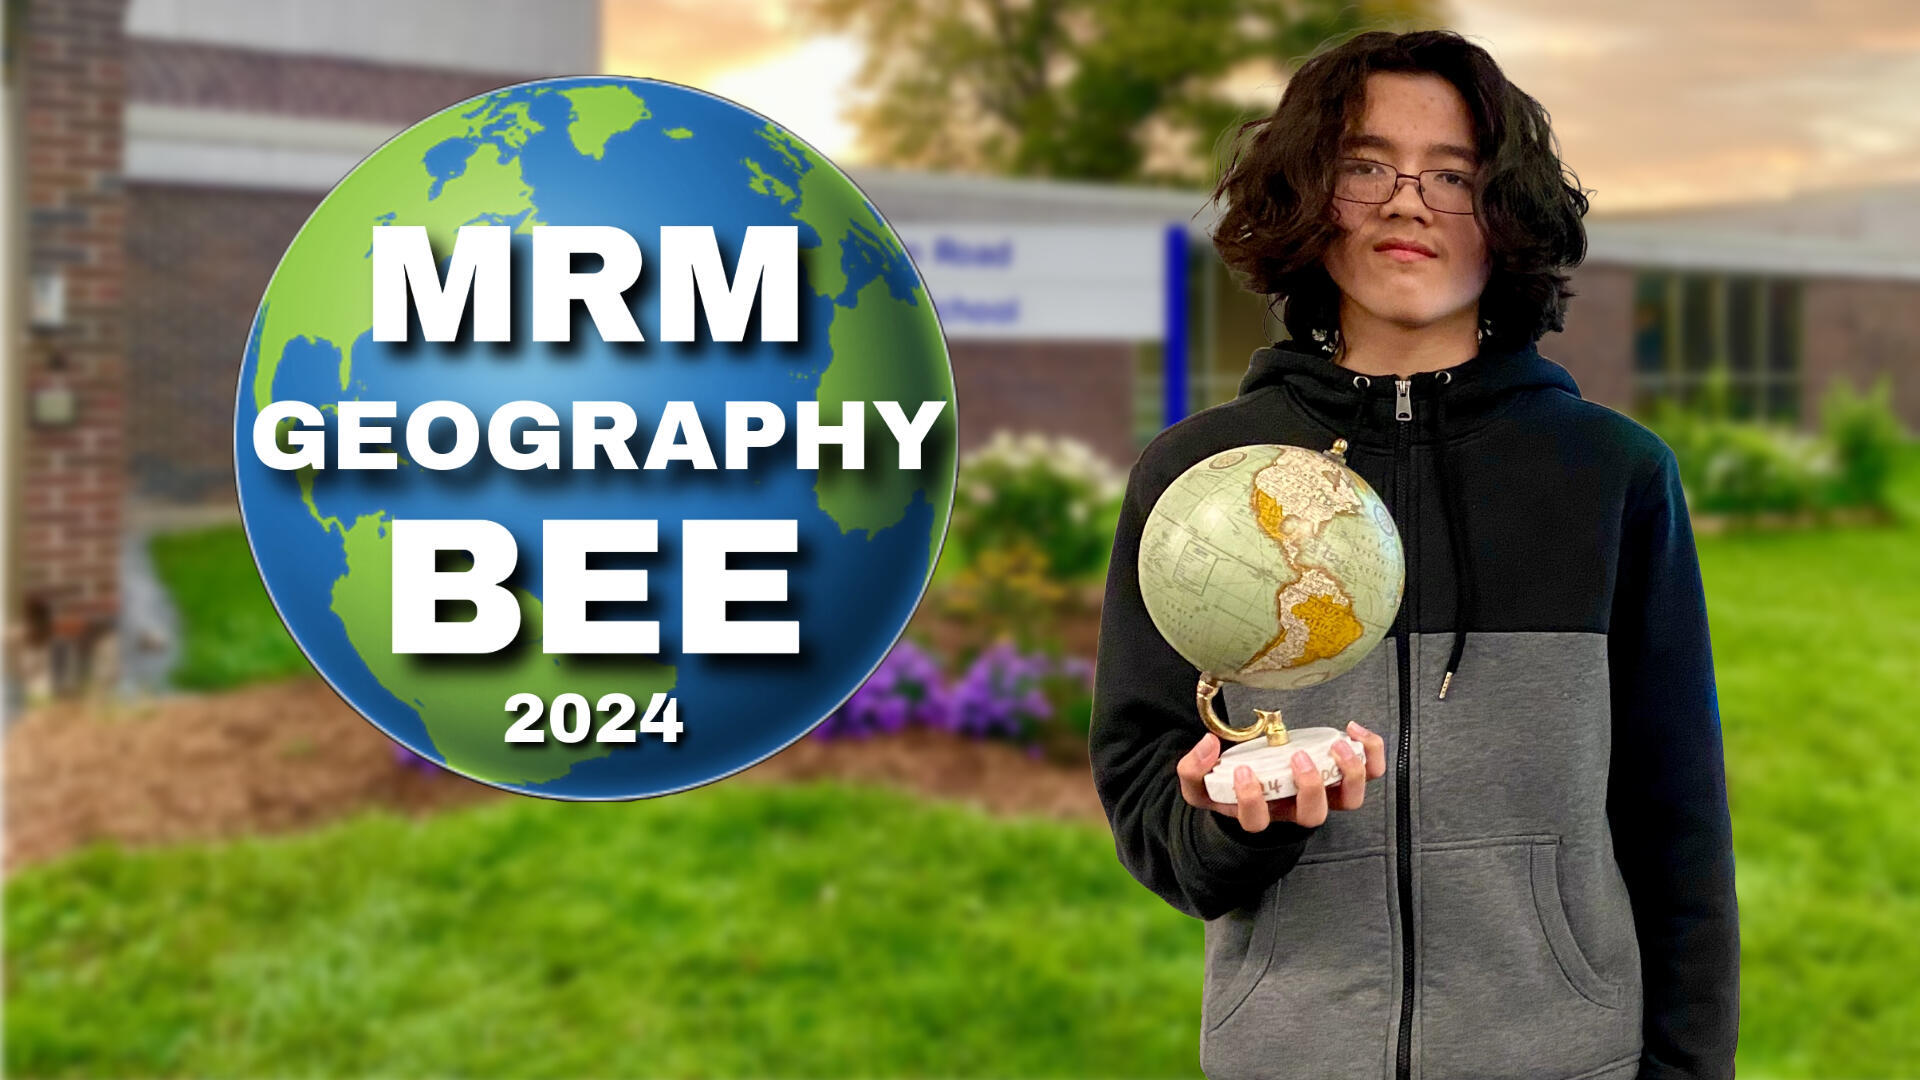 Congratulations to Asher Hamilton MRM Geography Bee Champion